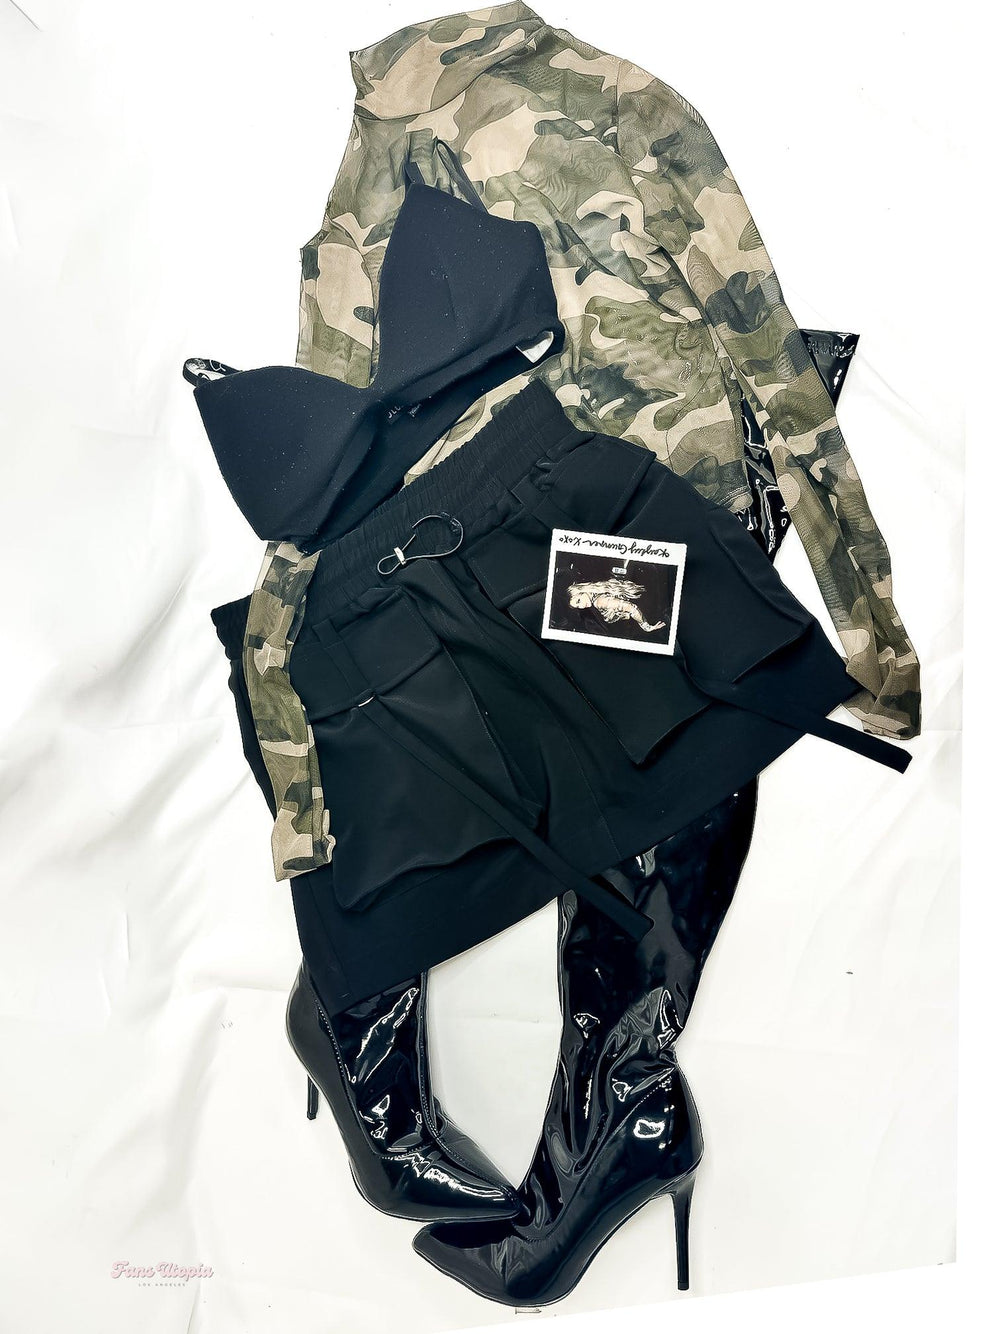 Kayley Gunner Camo Outfit & Knee High Boots + Signed Polaroid - FANS UTOPIA